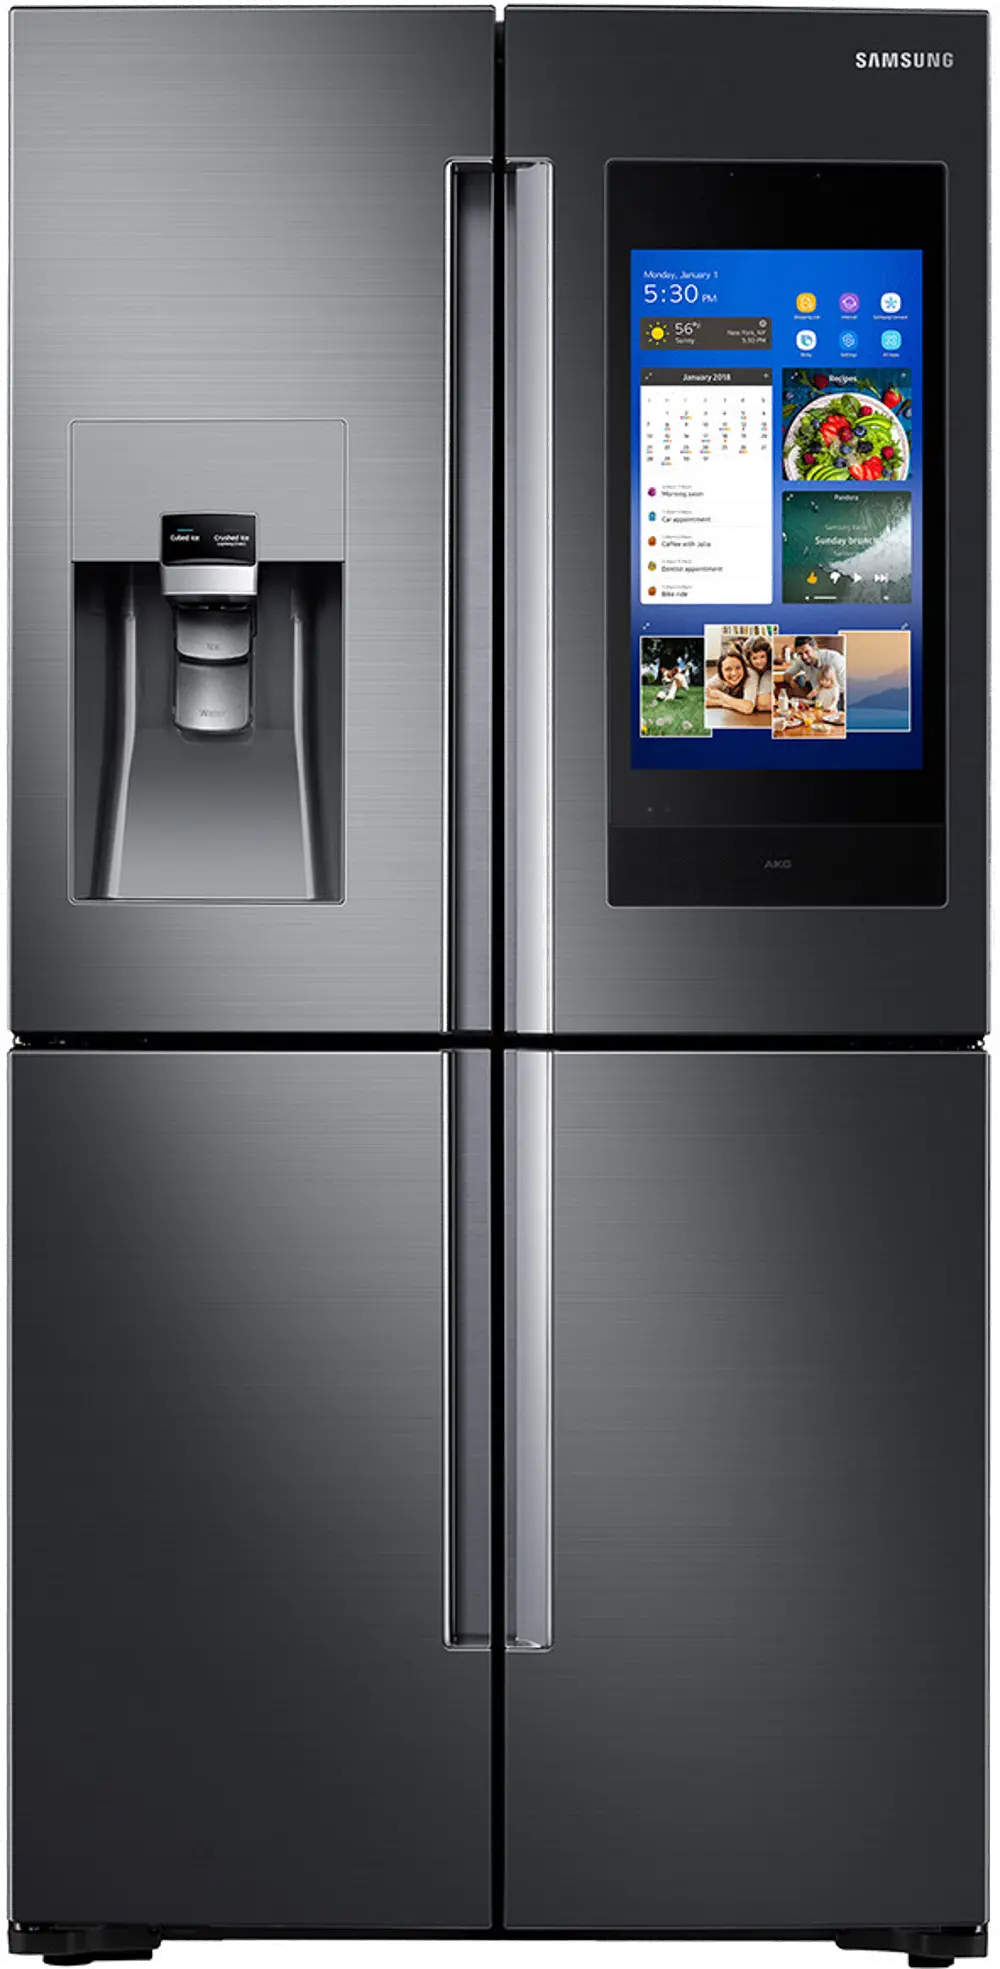 RF28N9780SG Samsung 4 Door French Door Smart Refrigerator with Family Hub and FlexZone - 27.9 cu. ft., 36 Inch Black Stainless Steel-1